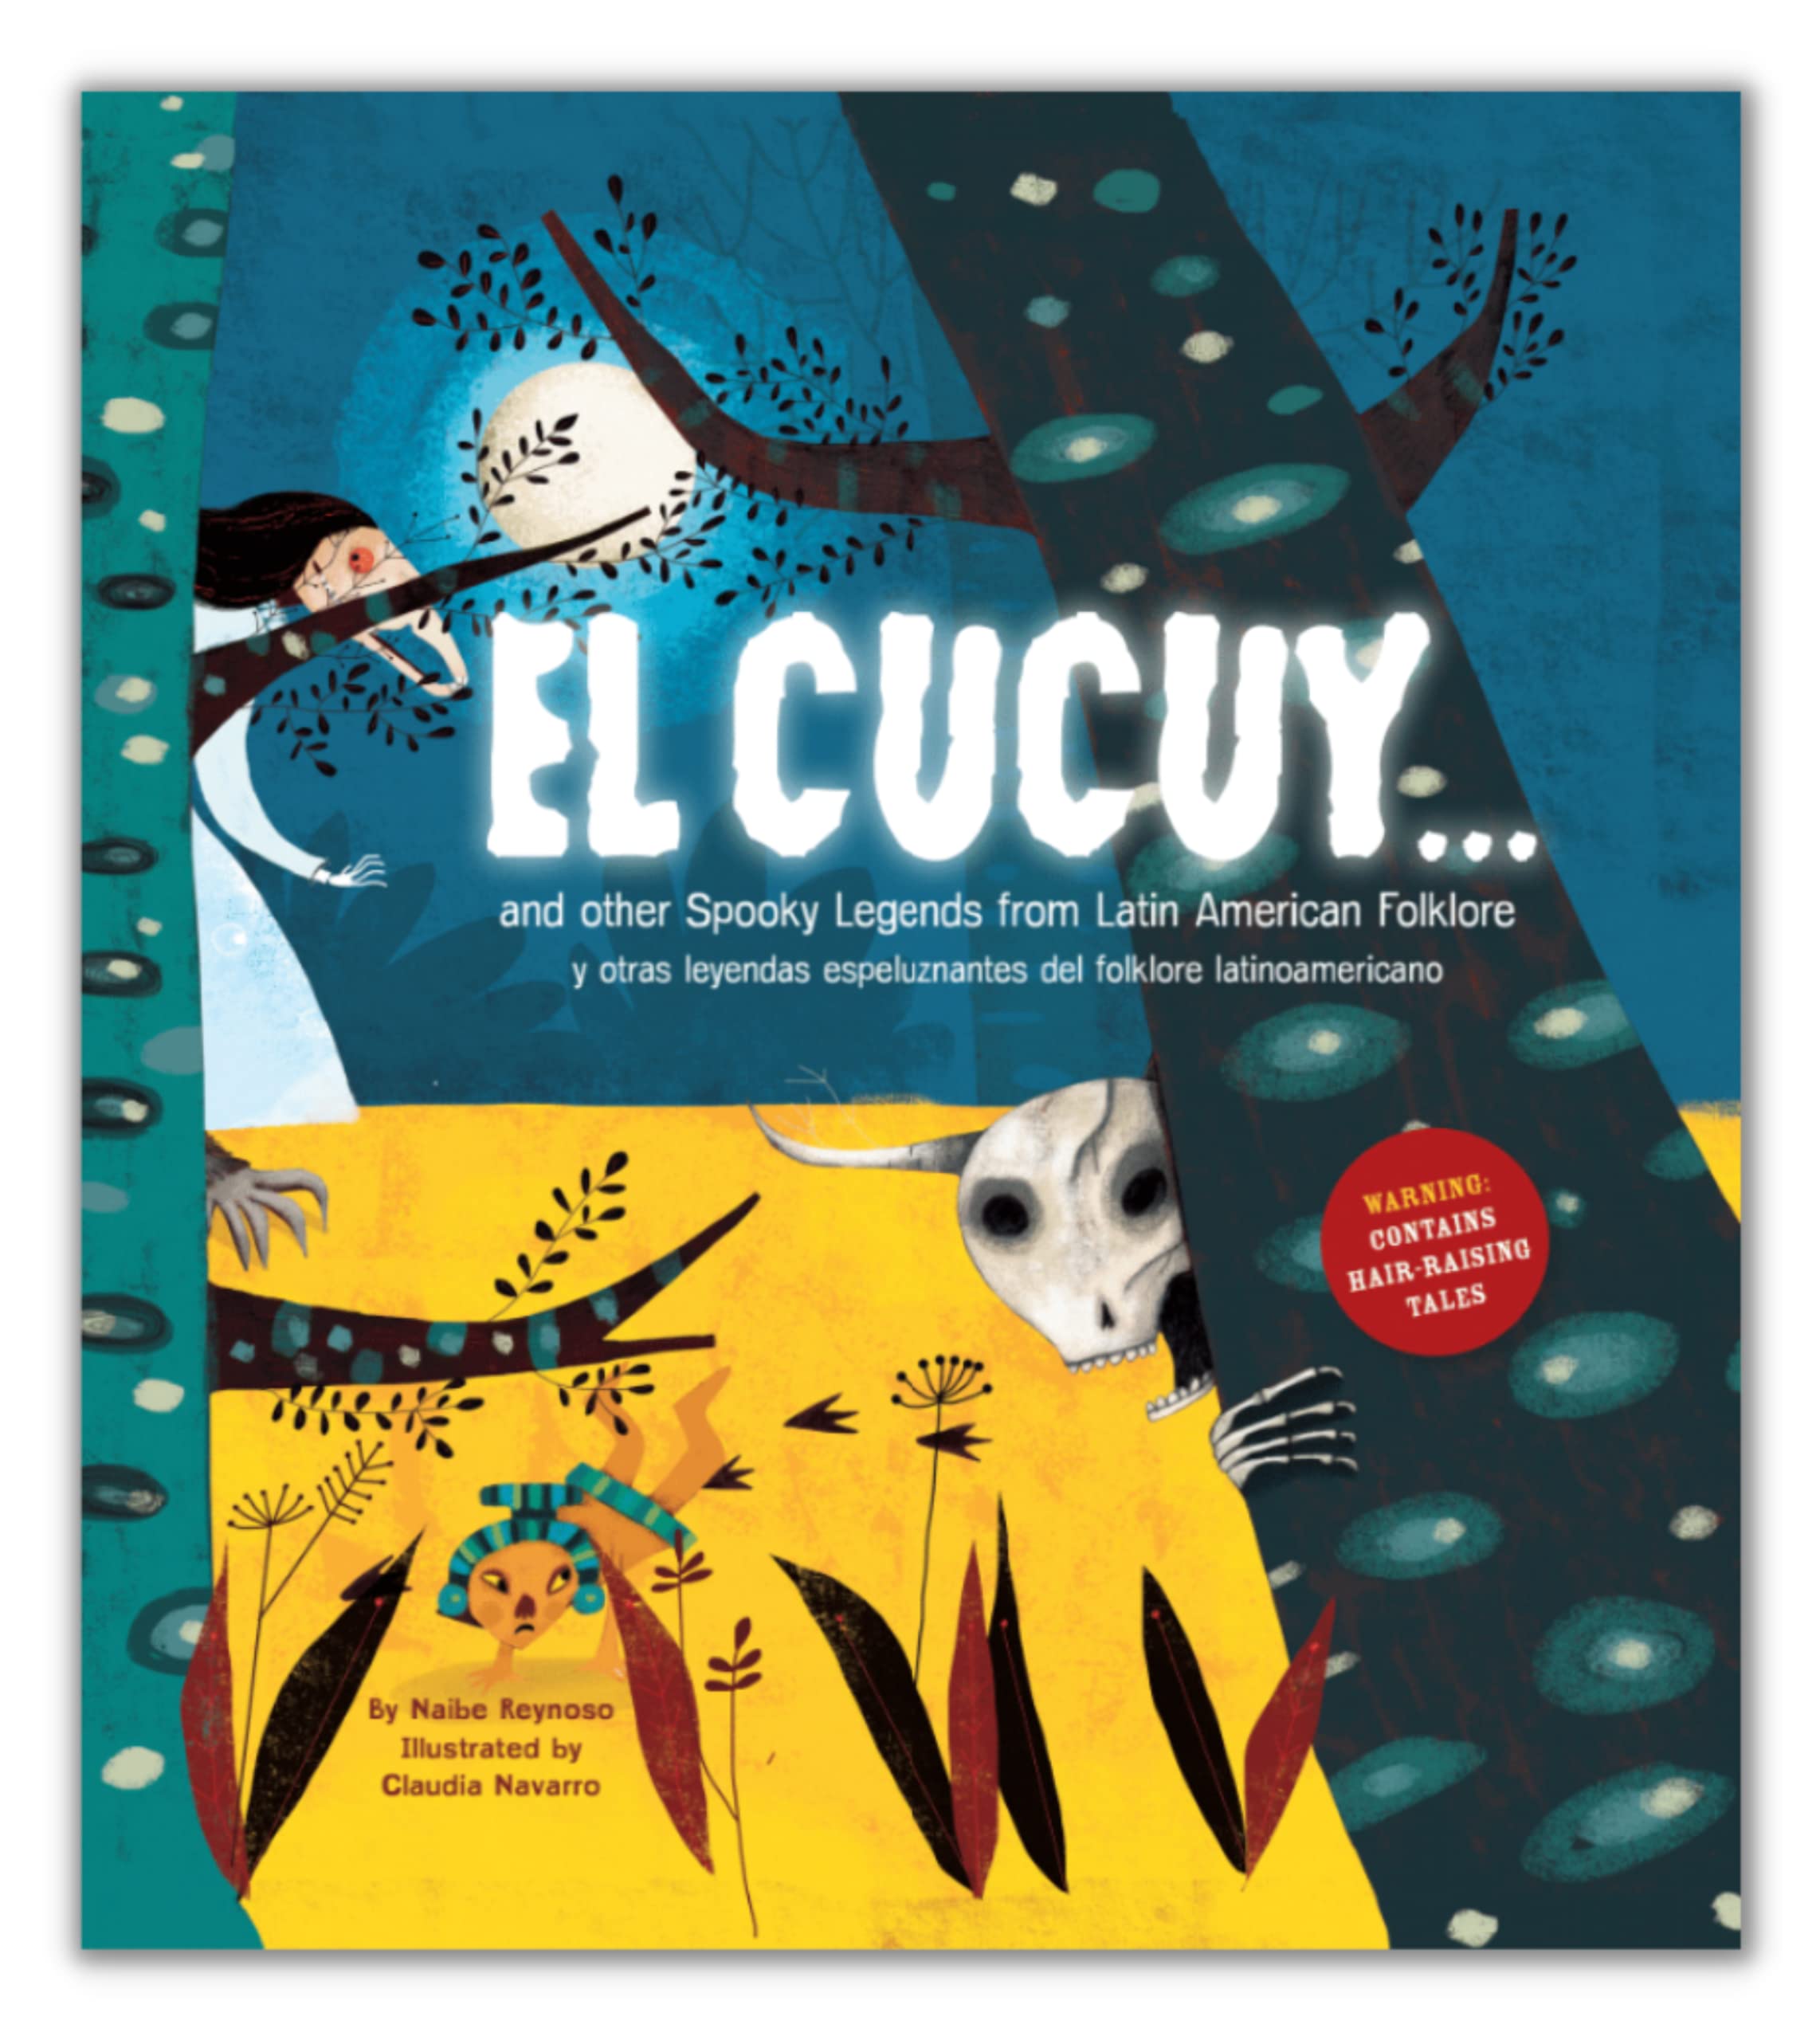 El Cucuy … and other Spooky Legends from Latin American Folklore (Hardcover)